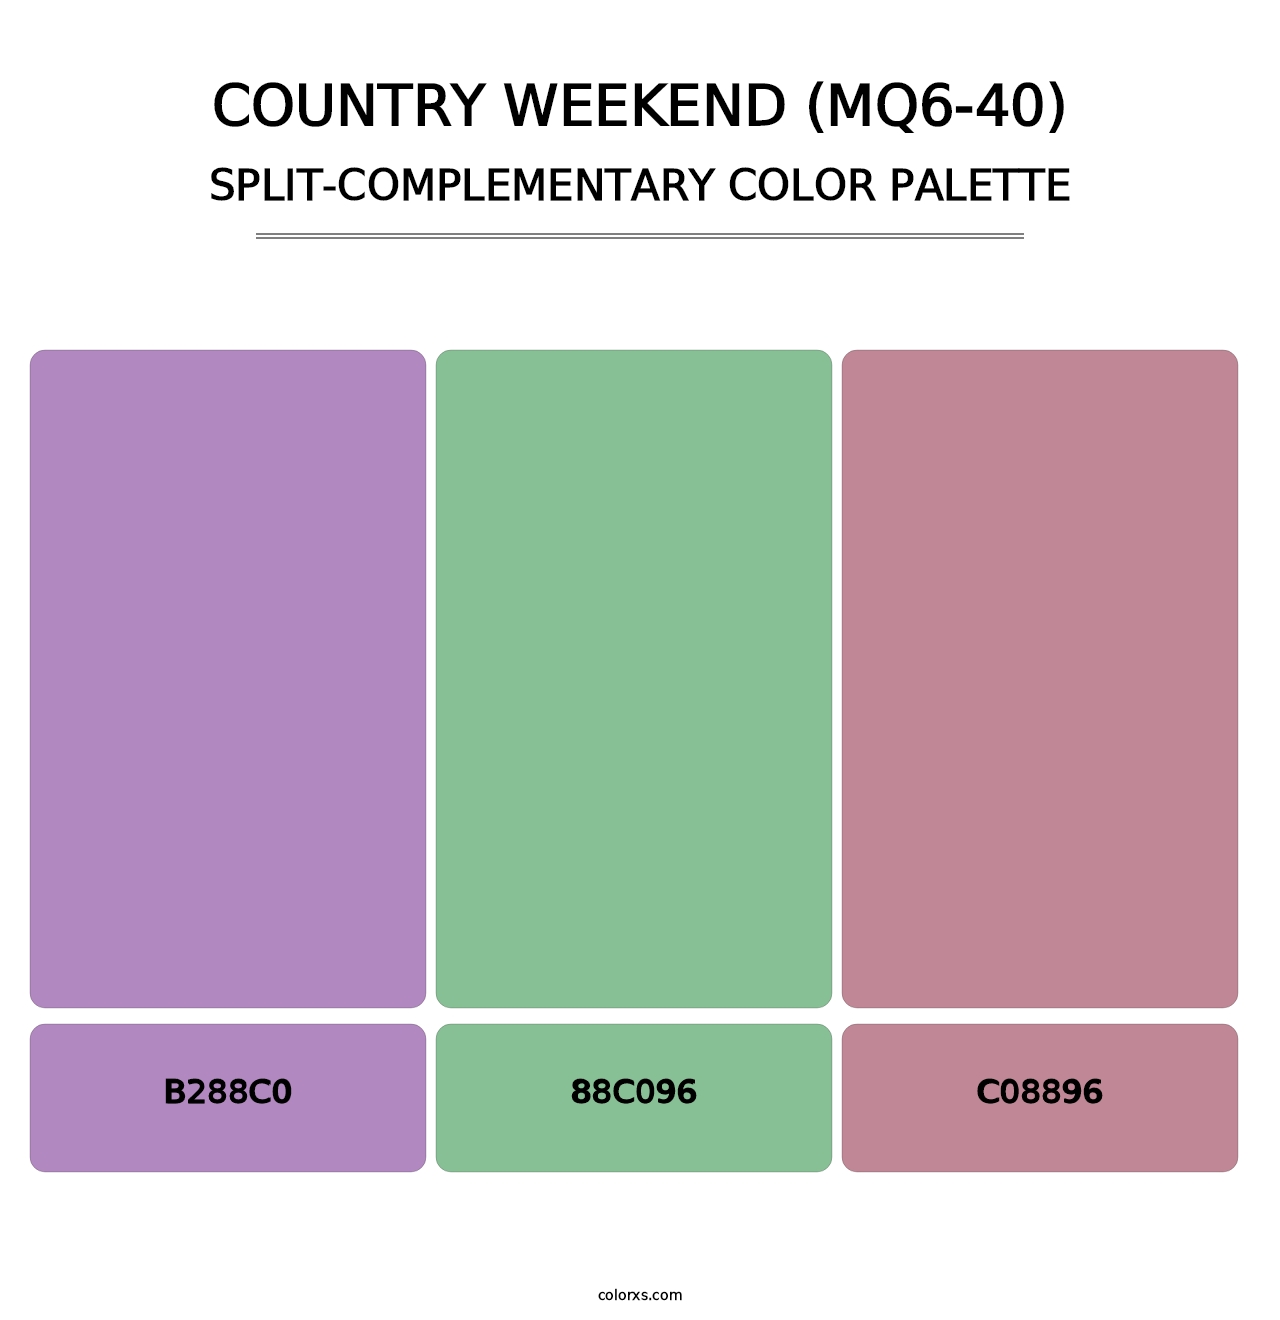 Country Weekend (MQ6-40) - Split-Complementary Color Palette